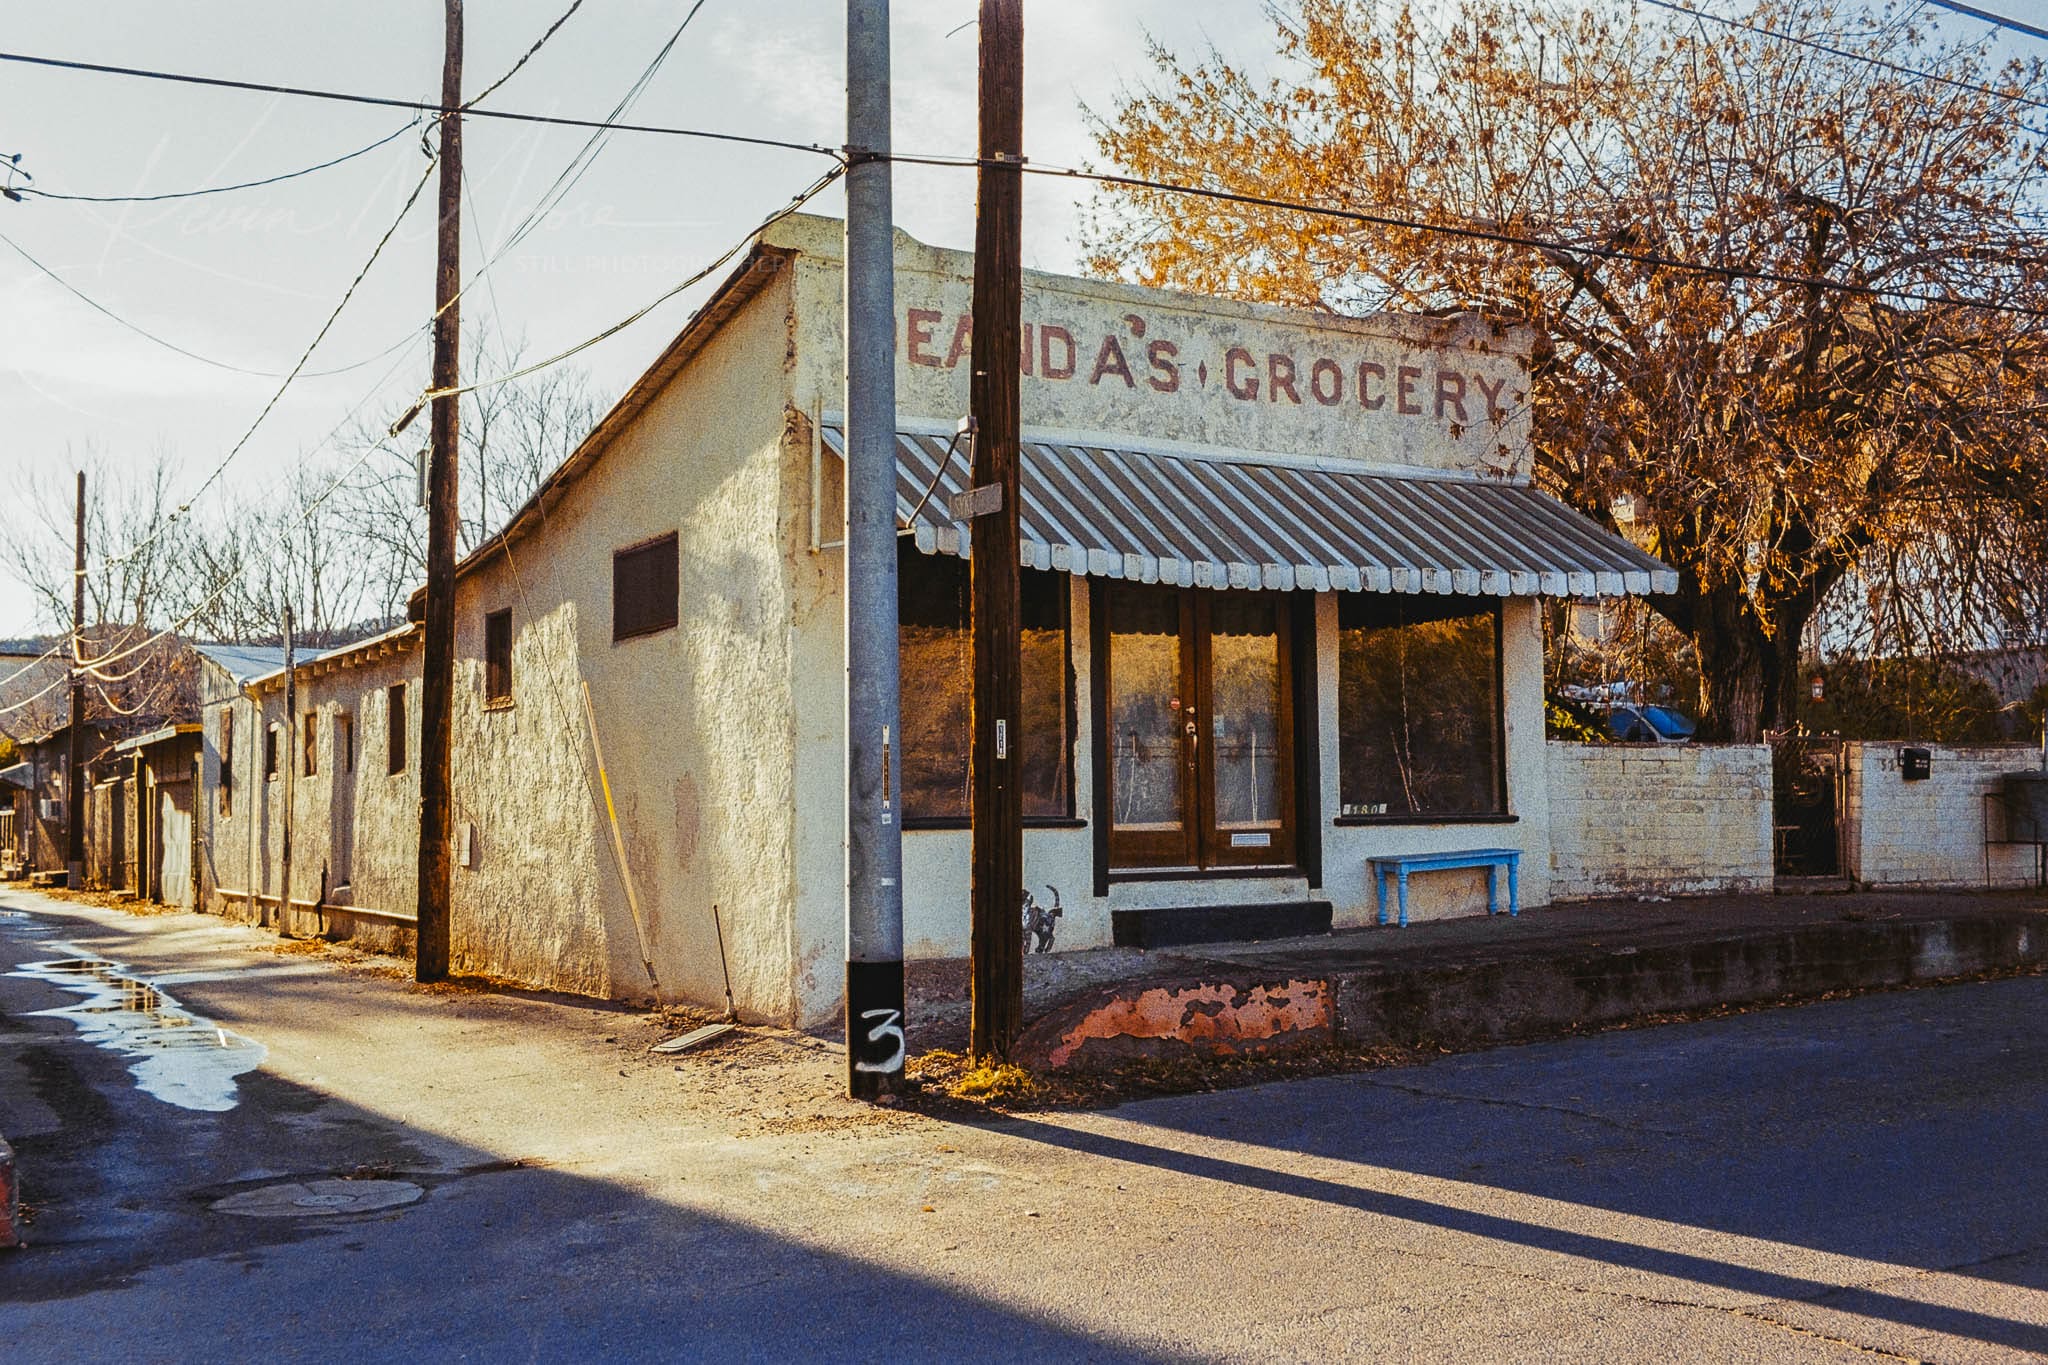 Vintage Miami Arizona Grocery Store at dusk in an aged, rustic neighborhood.